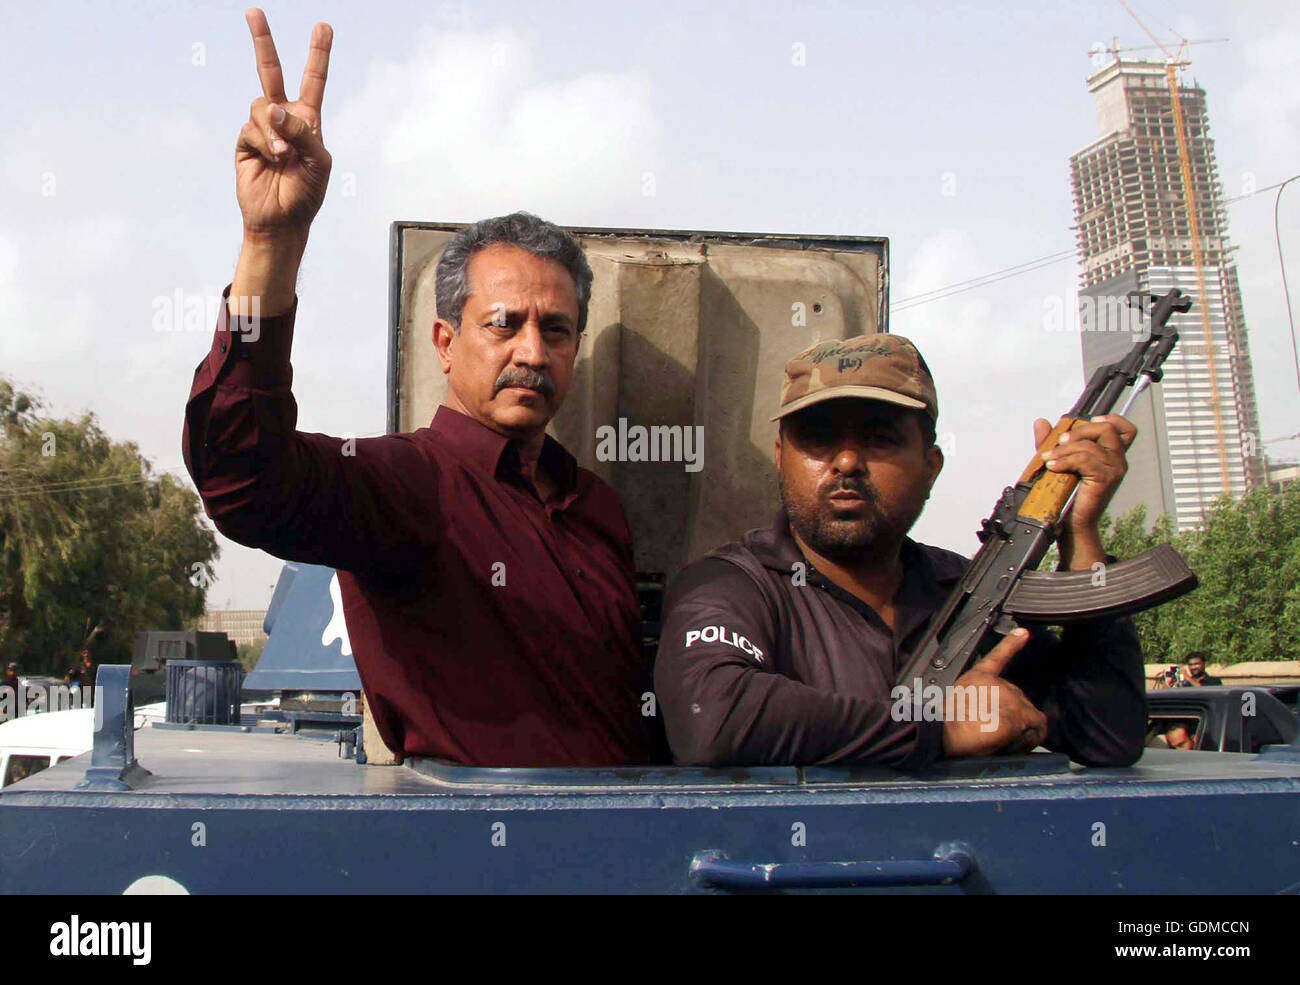 Muttahida Qaumi Movement leader Wasim Akhtar makes victory sign as he is being shifted to Karachi's Central Prison in a police van after rejected his interim bail in a terror facilitation case at an anti-terrorism court (ATC) in Karachi on Tuesday, July 19, 2016. Muttahida Qaumi Movement (MQM) leaders Wasim Akhtar and Rauf Siddiqui, and Pak Sarzameen Party president Anis Qaimkhani were taken into custody in a terror facilitation case after an anti-terrorism court (ATC) rejected their interim bail. Stock Photo